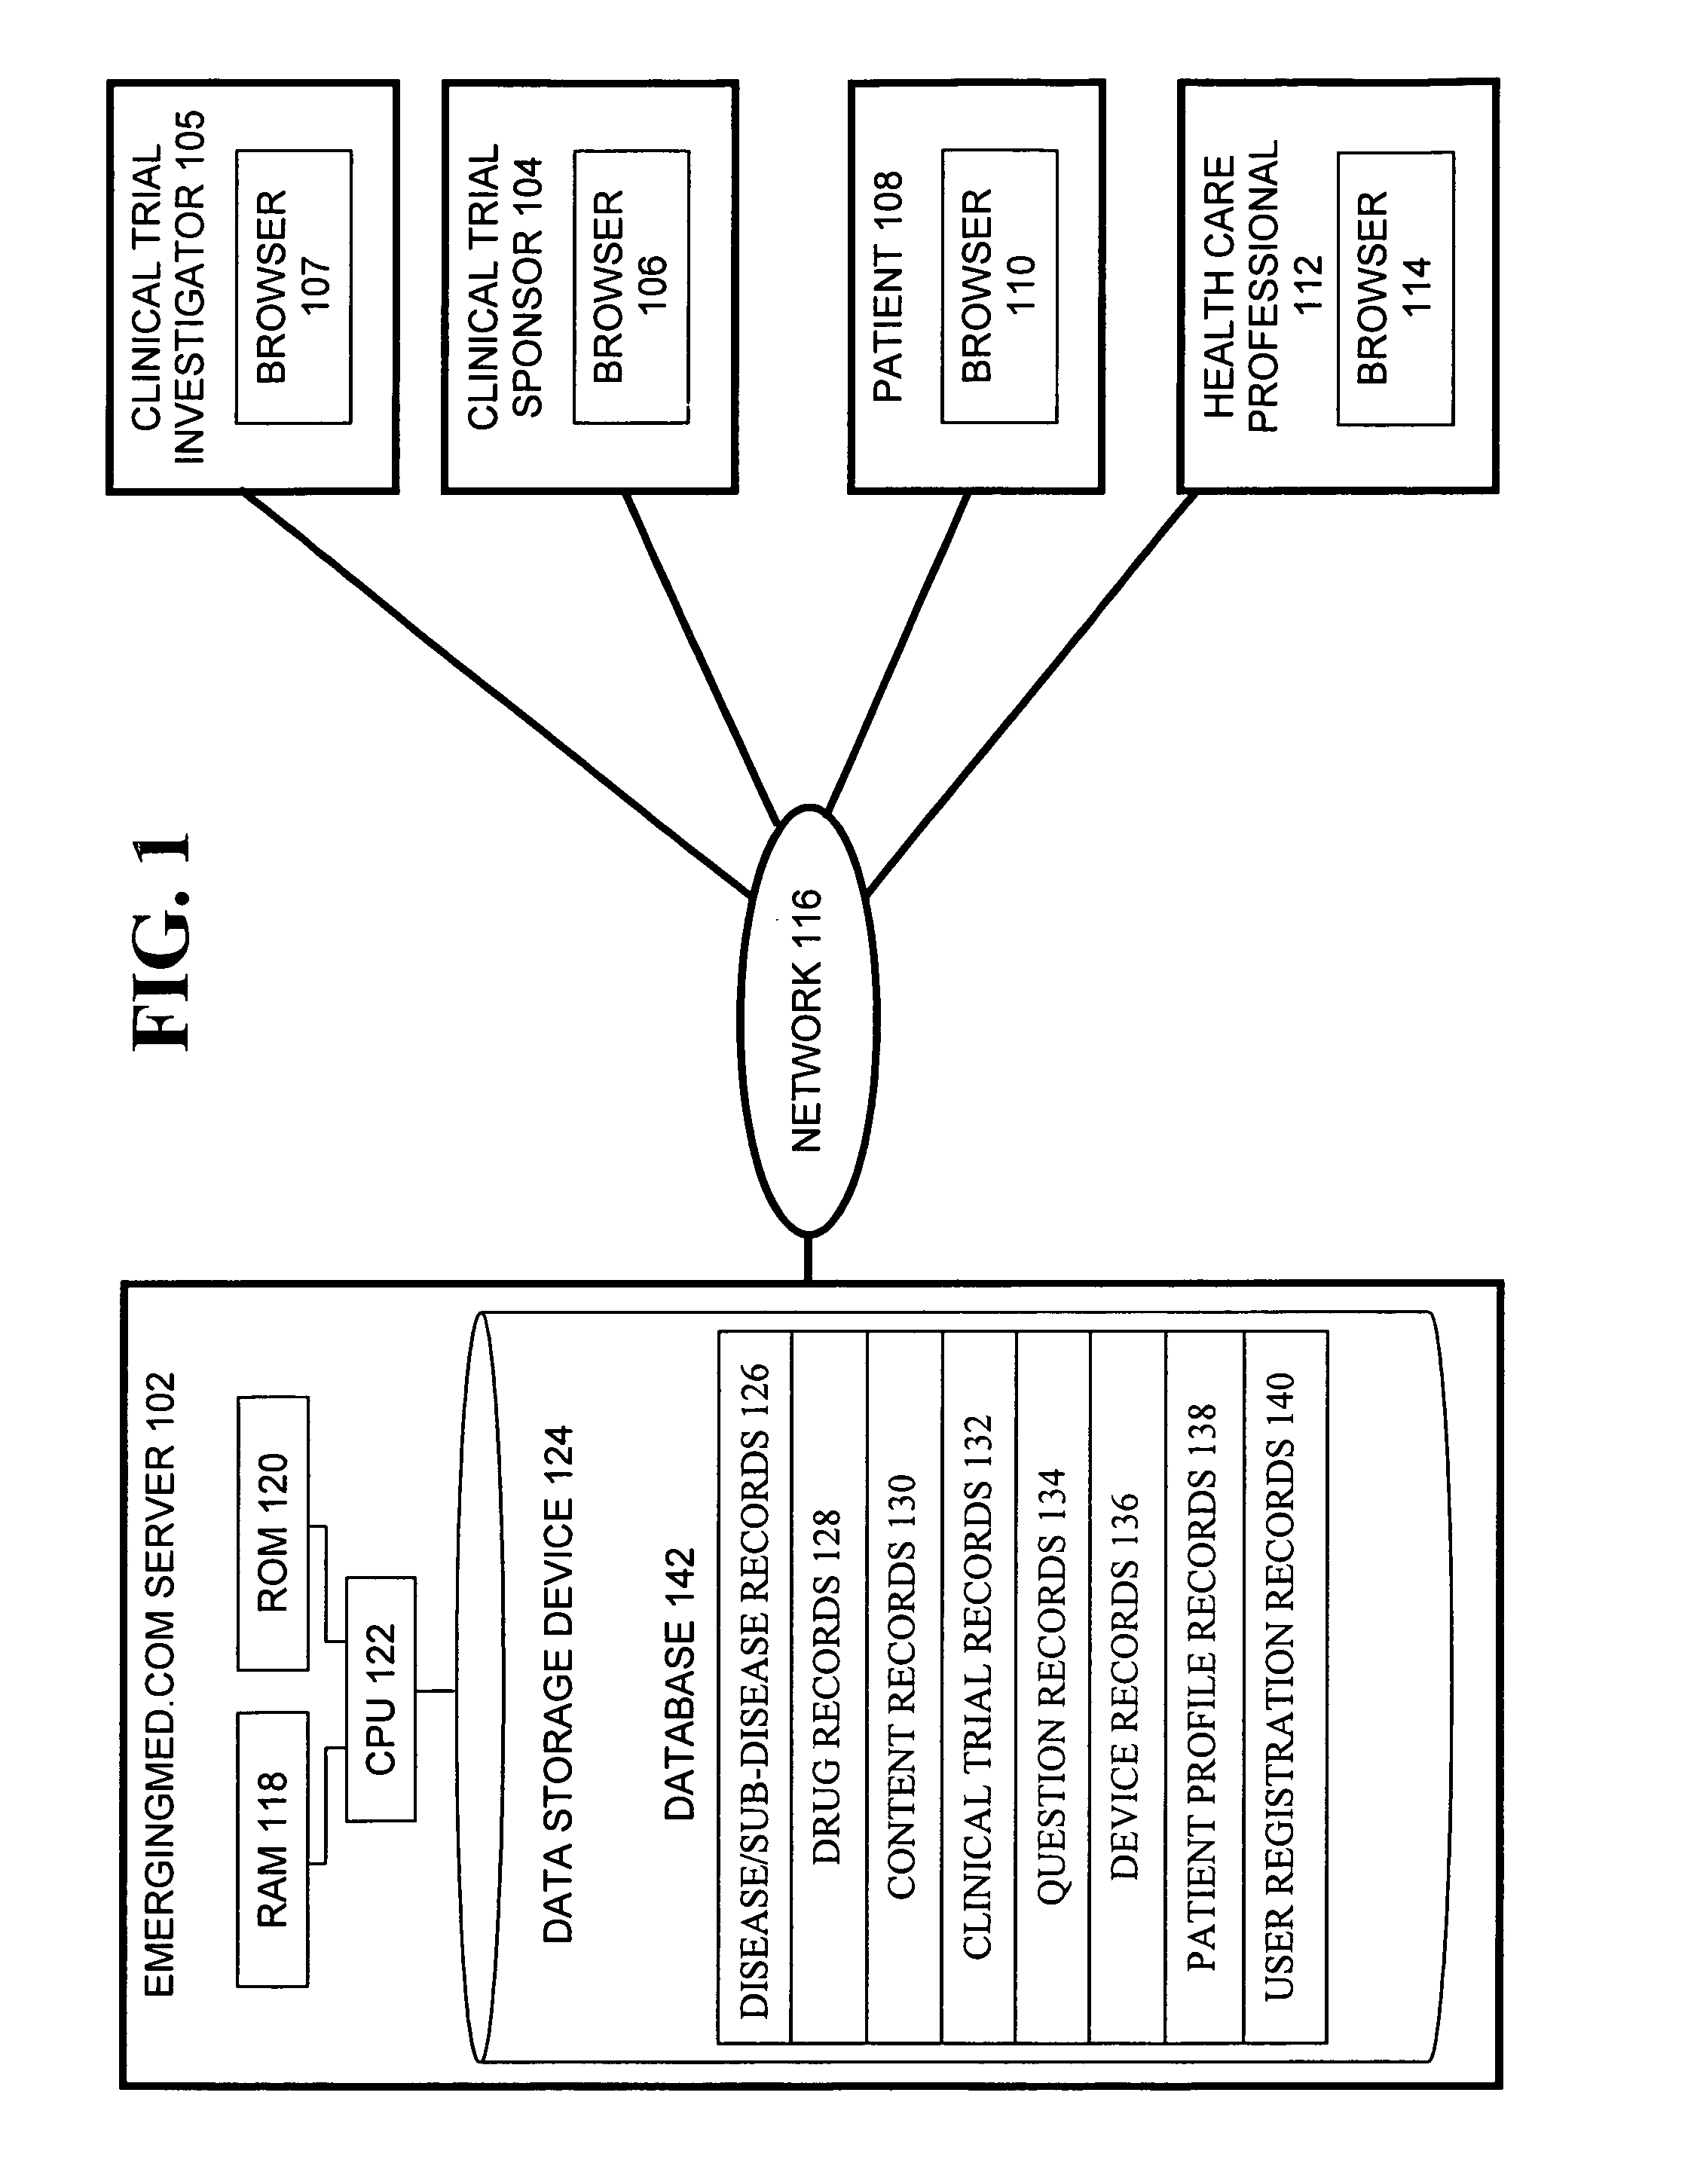 System and method for matching patients with clinical trials